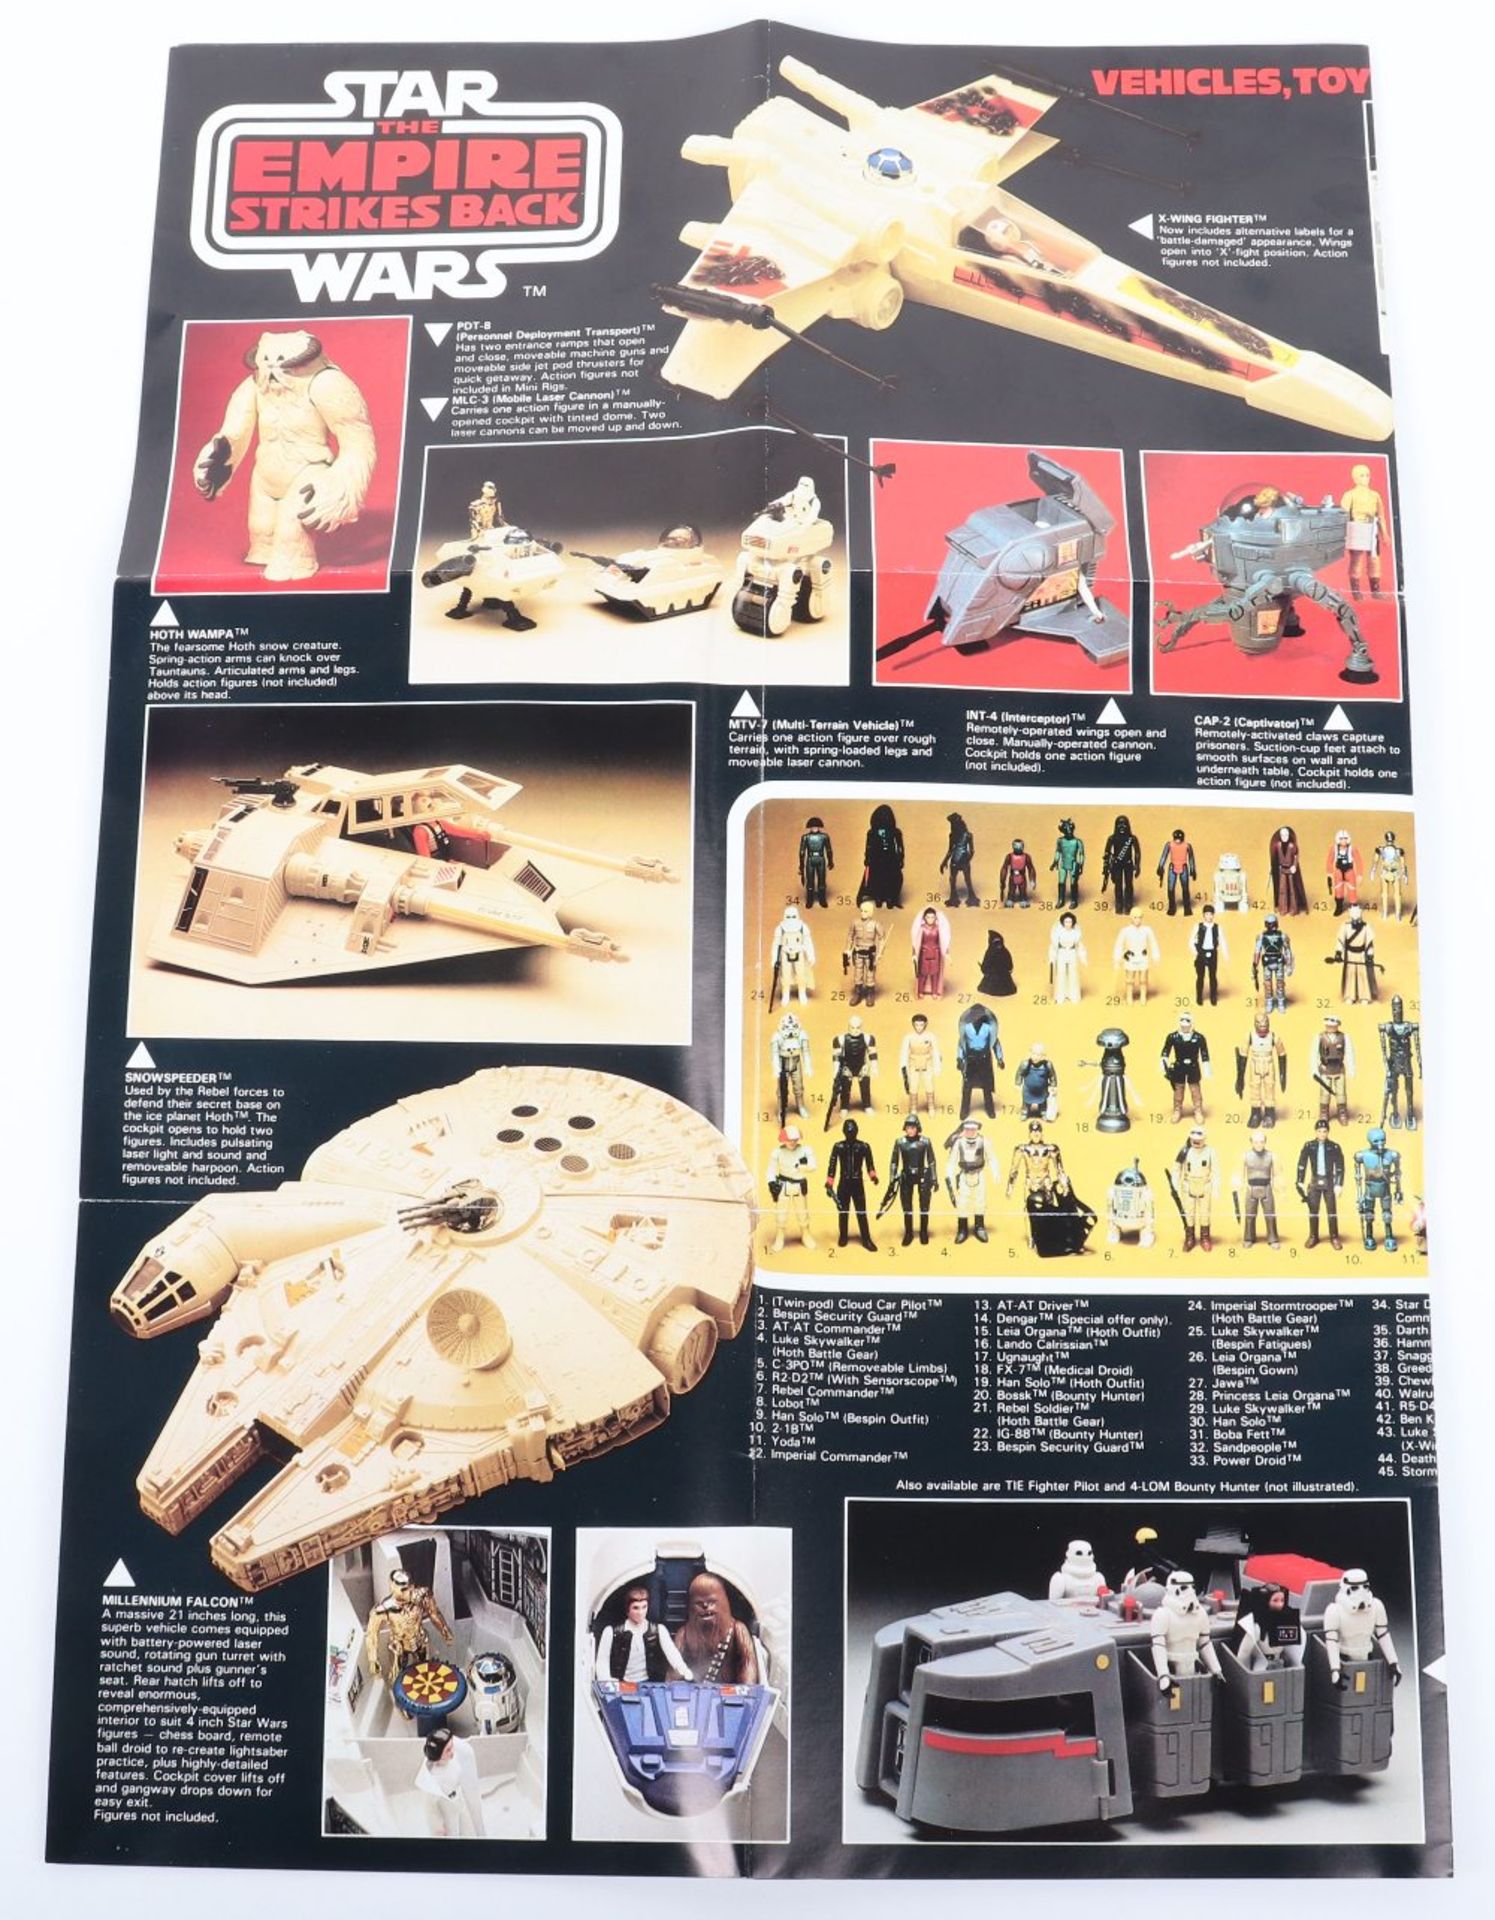 Boxed Palitoy Star Wars The Empire Strikes Back Rebel Armoured Snowspeeder - Image 4 of 11